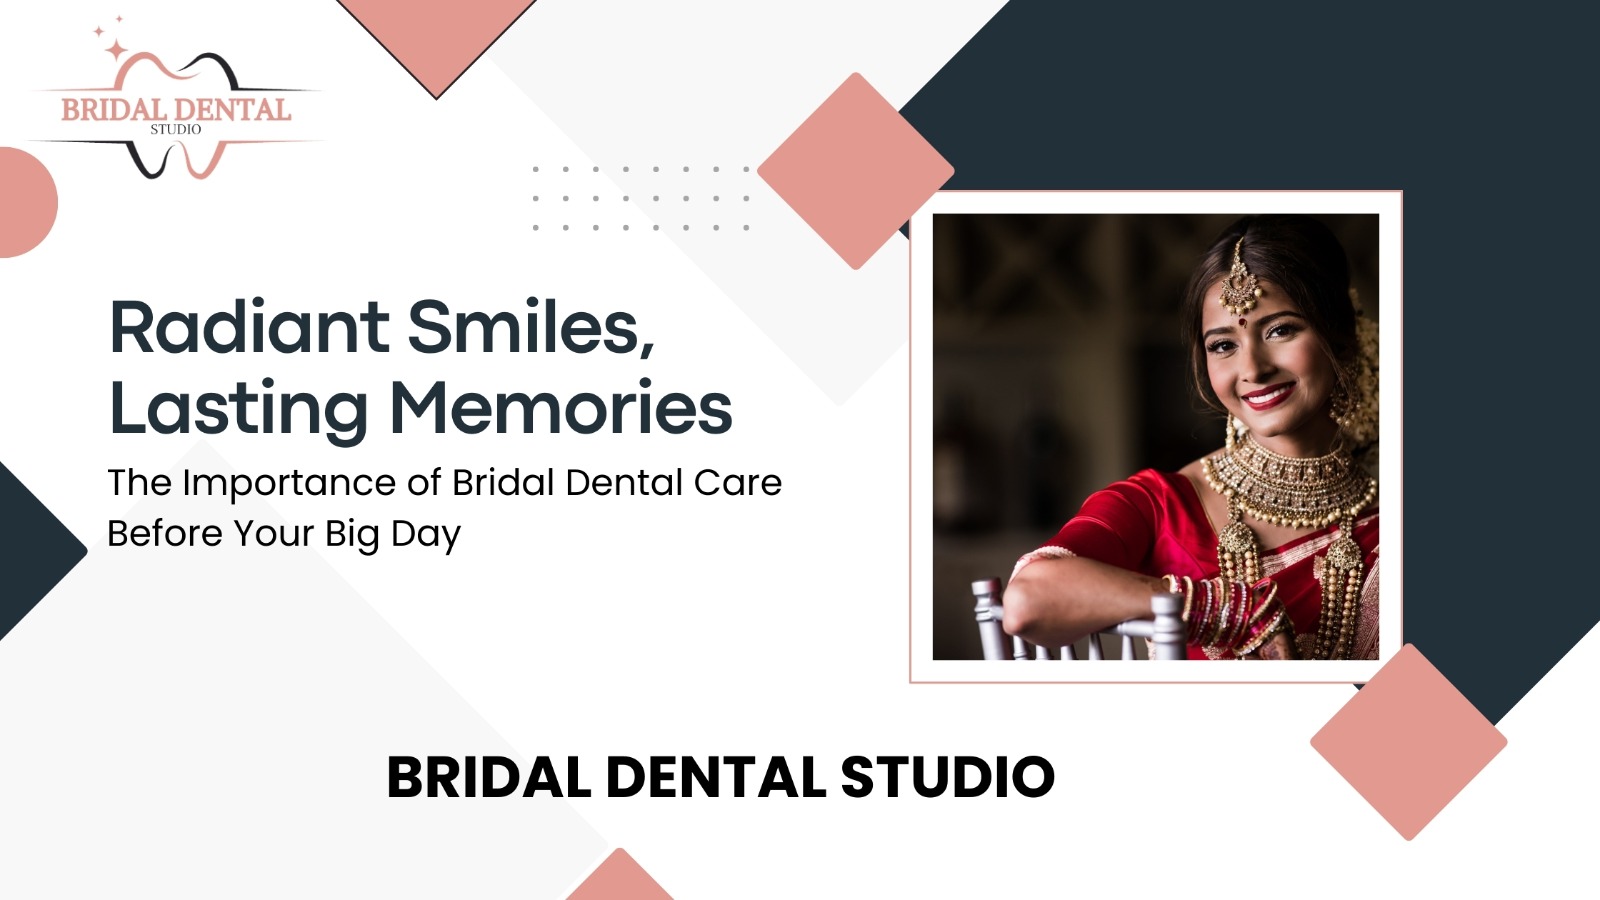 Radiant Smiles: The Importance of Bridal Dental Care Before Your Big Day